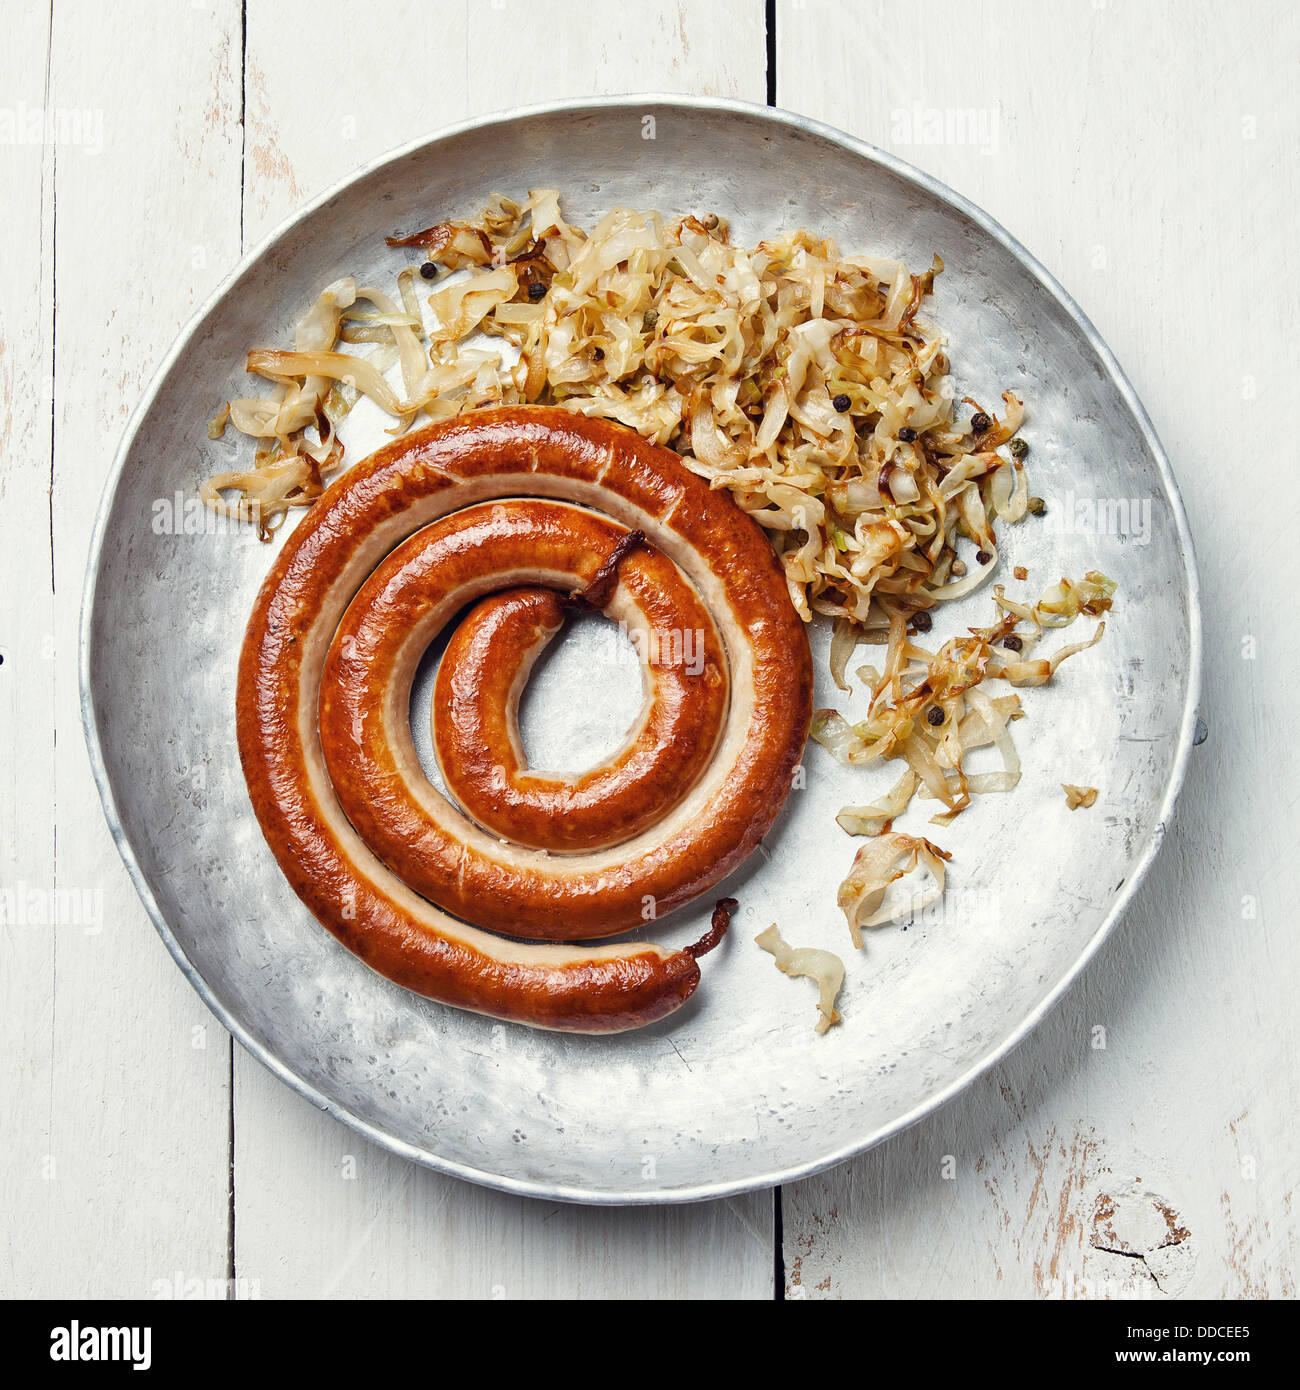 Roasted sausage with stewed cabbage Stock Photo